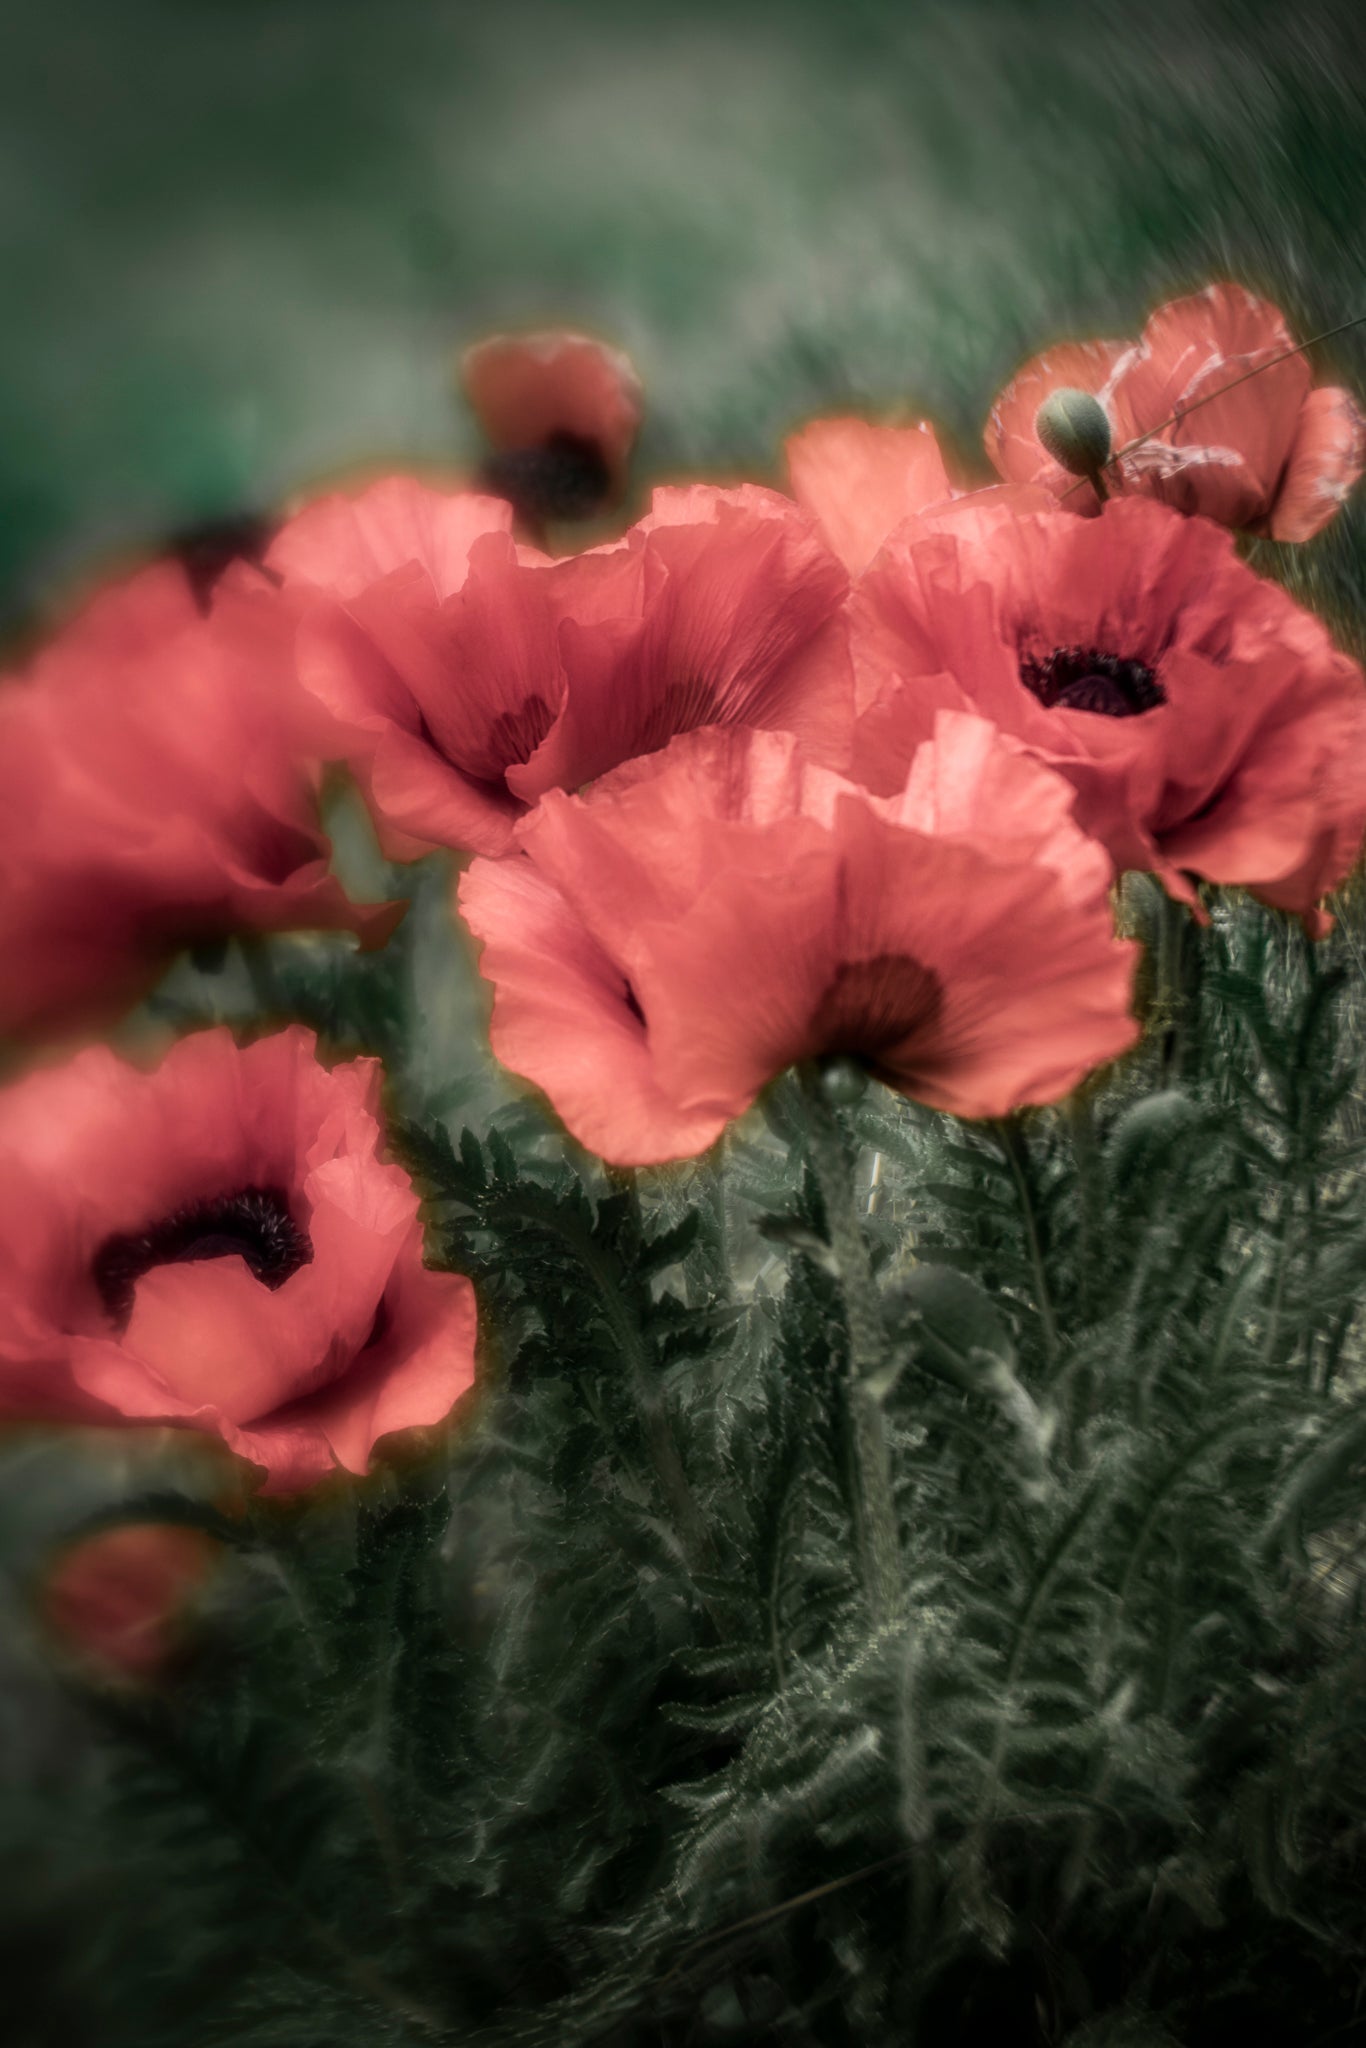 Photograph of red poppies on dark green stormy background by Cameron Dreaux. 